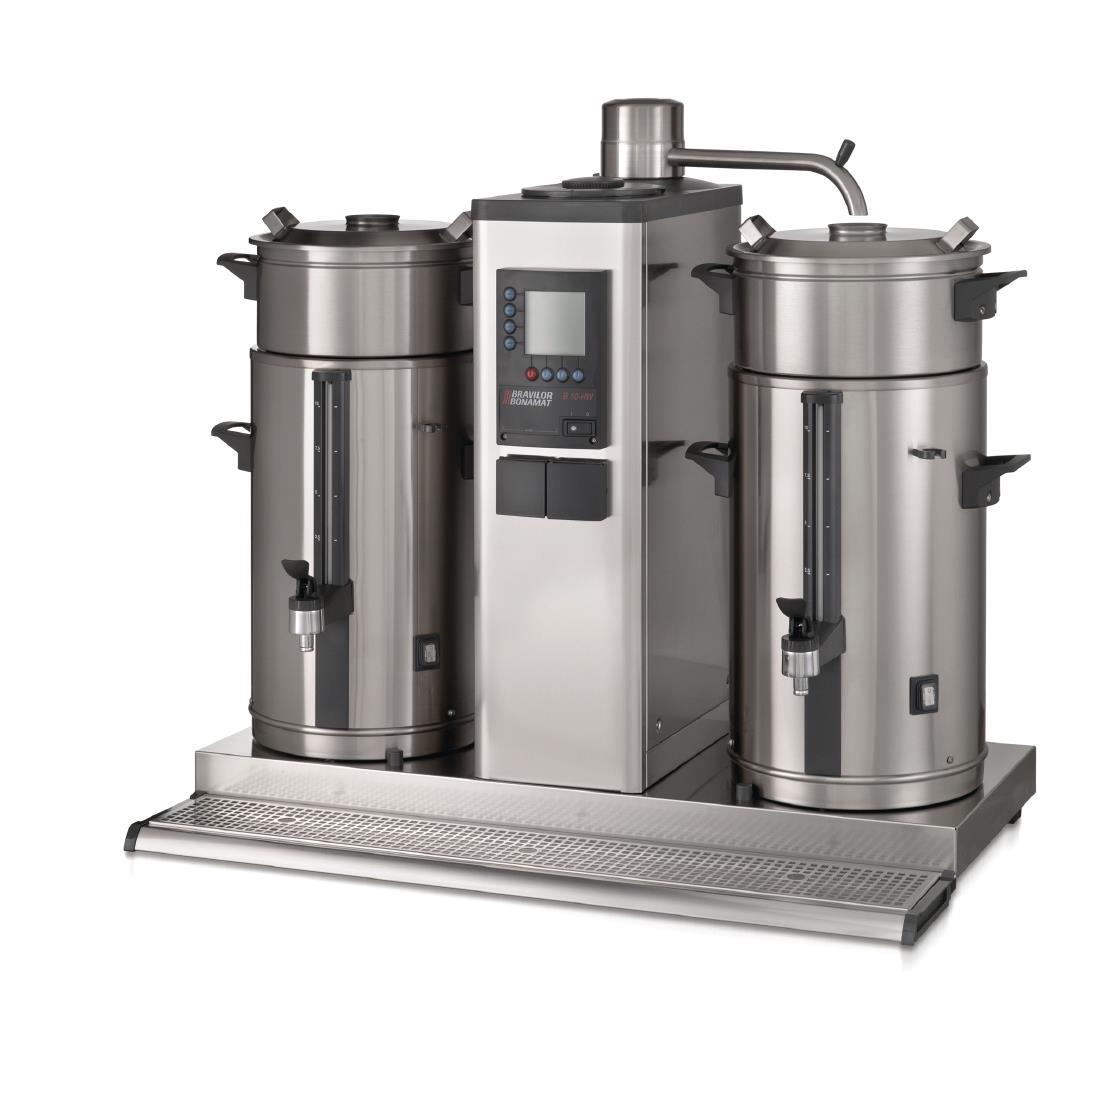 Bravilor B10 Bulk Coffee Brewer with 2x10Ltr Coffee Urns Three Phase - DC678-3P  - 1